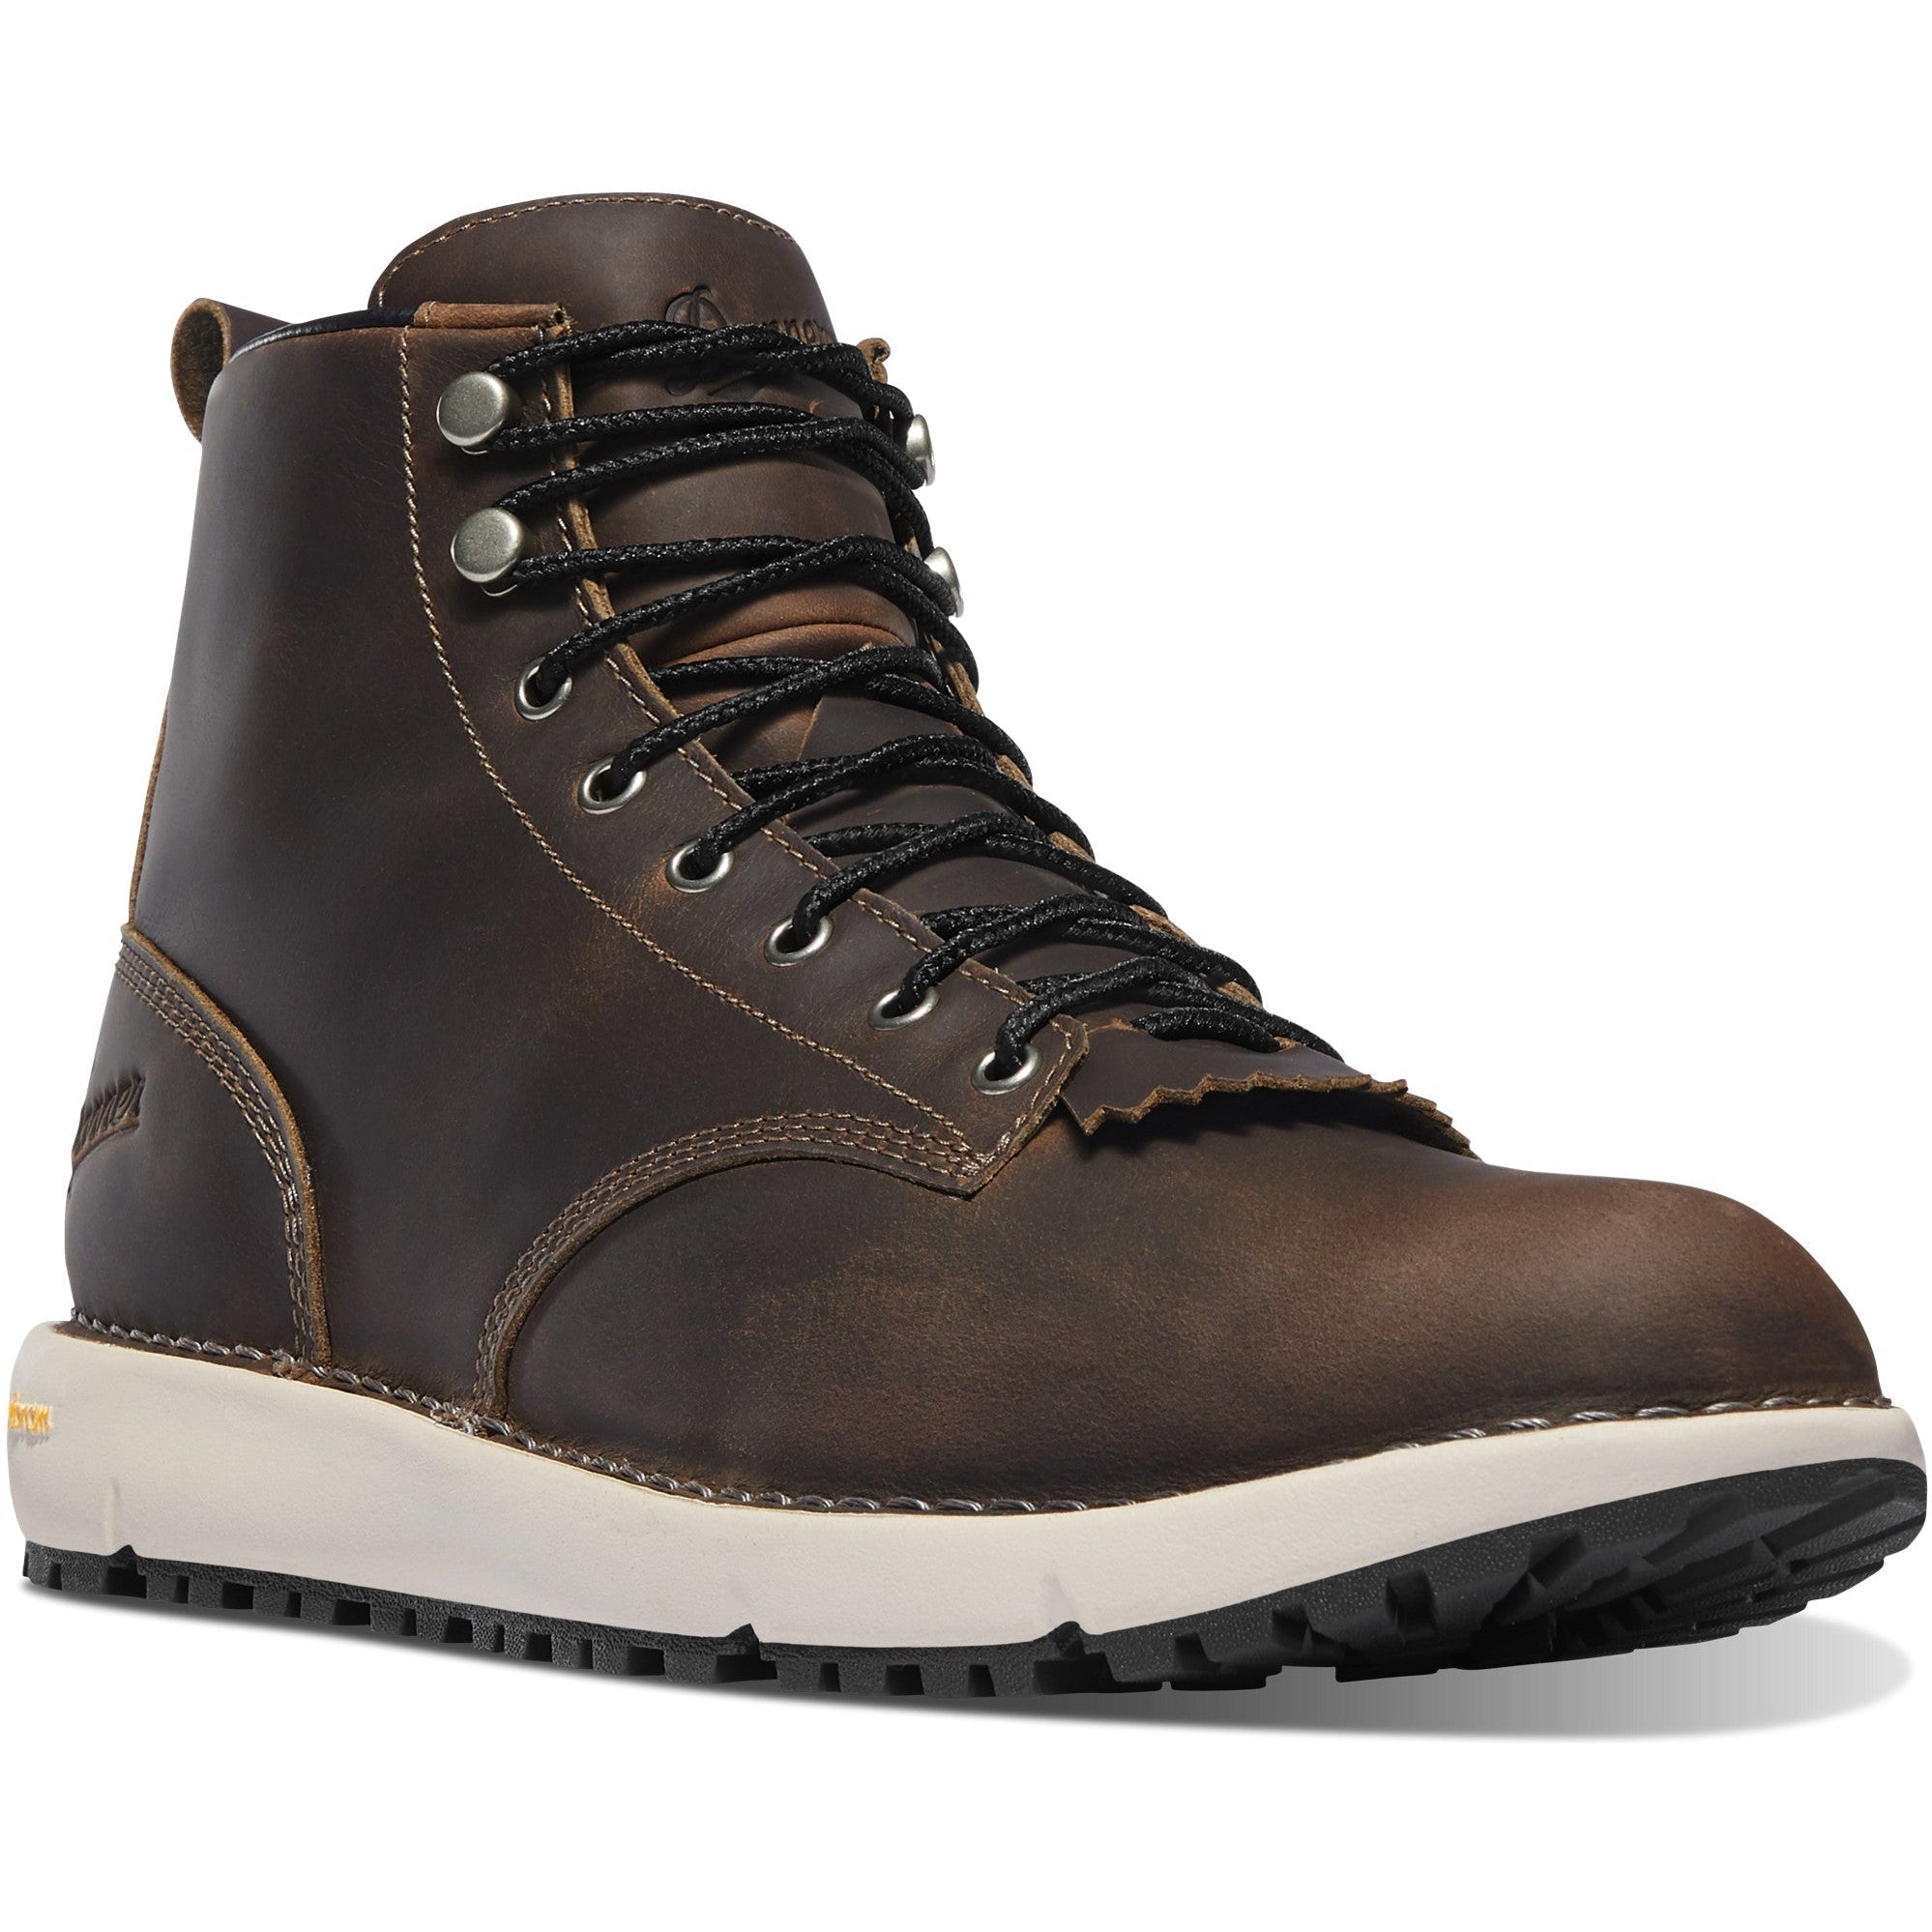 Danner Men's Logger 917 6" Classic Lifestyle Boot - Chocolate - 34650  - Overlook Boots